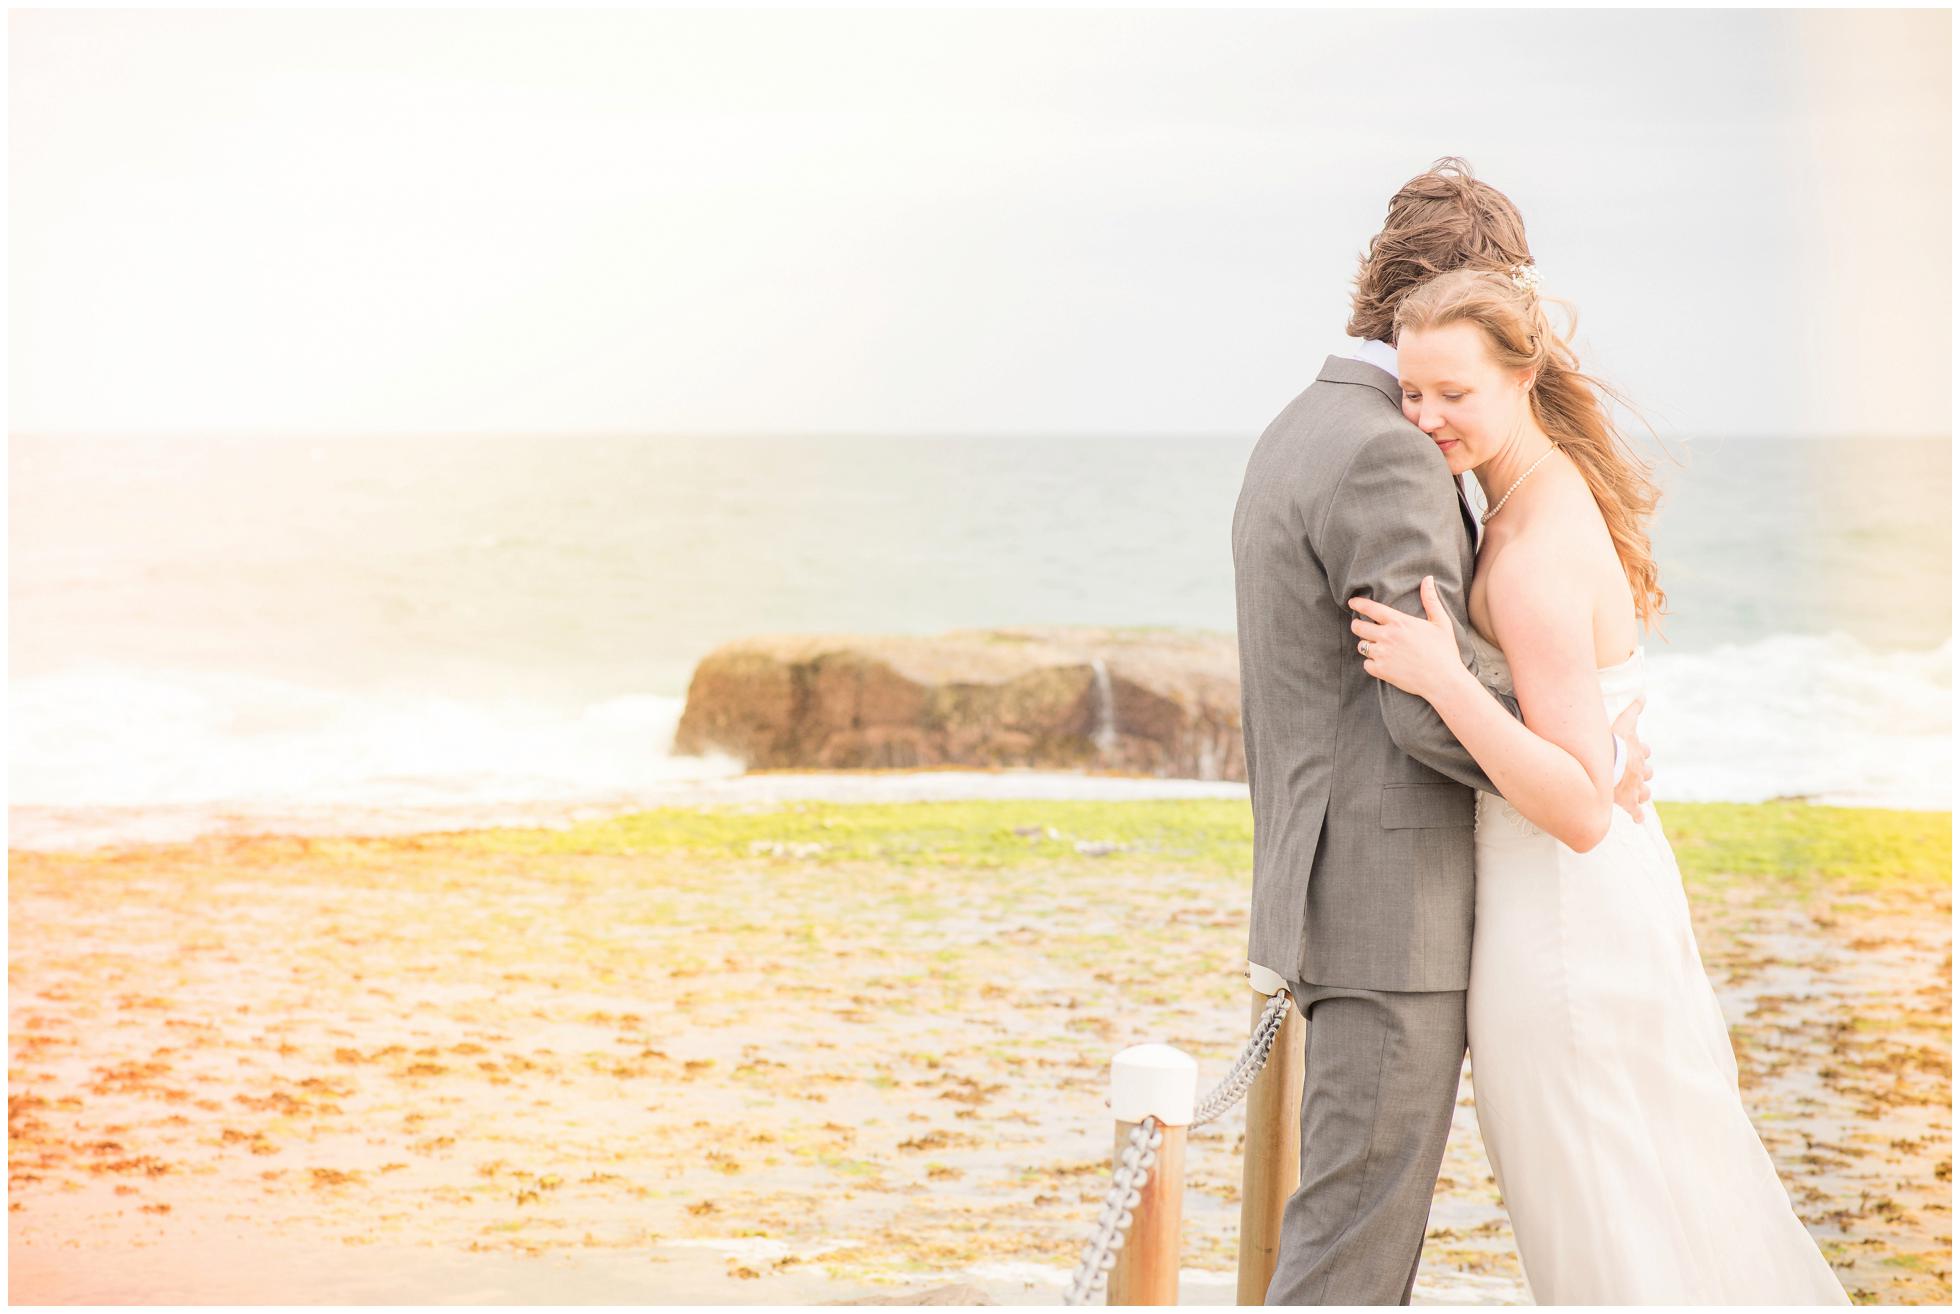 Mona Vale Sydney Wedding Photographer at the Robert Dunn Reserve shooting a gorgeous couple down on the beach. Natural wedding photography.